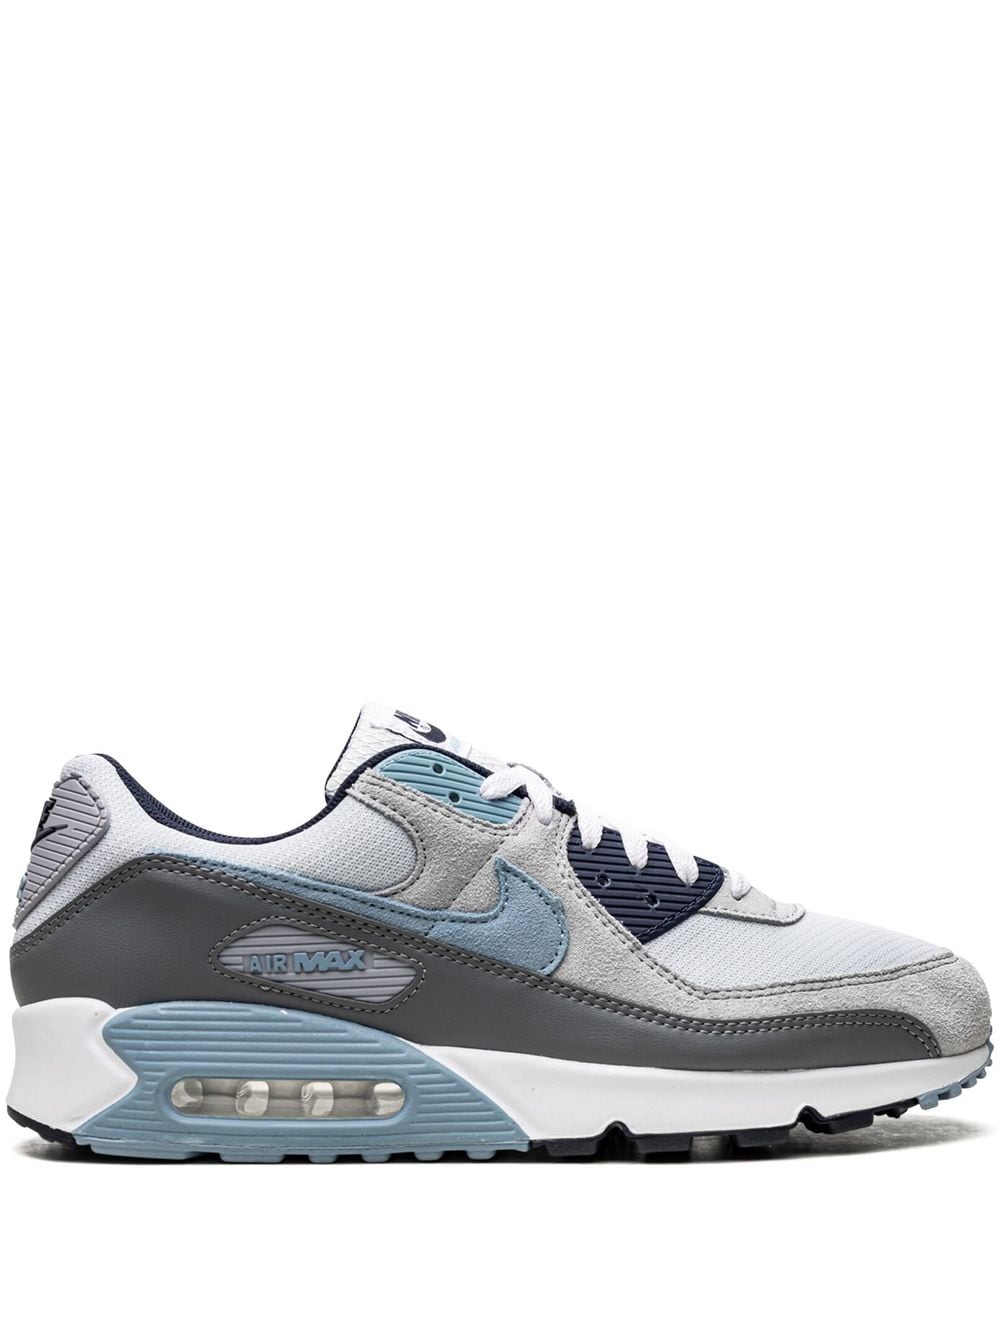 Nike Air Max 90 Low-top Sneakers In Pure Platinum/obsidian/wolf Grey/warn Blue